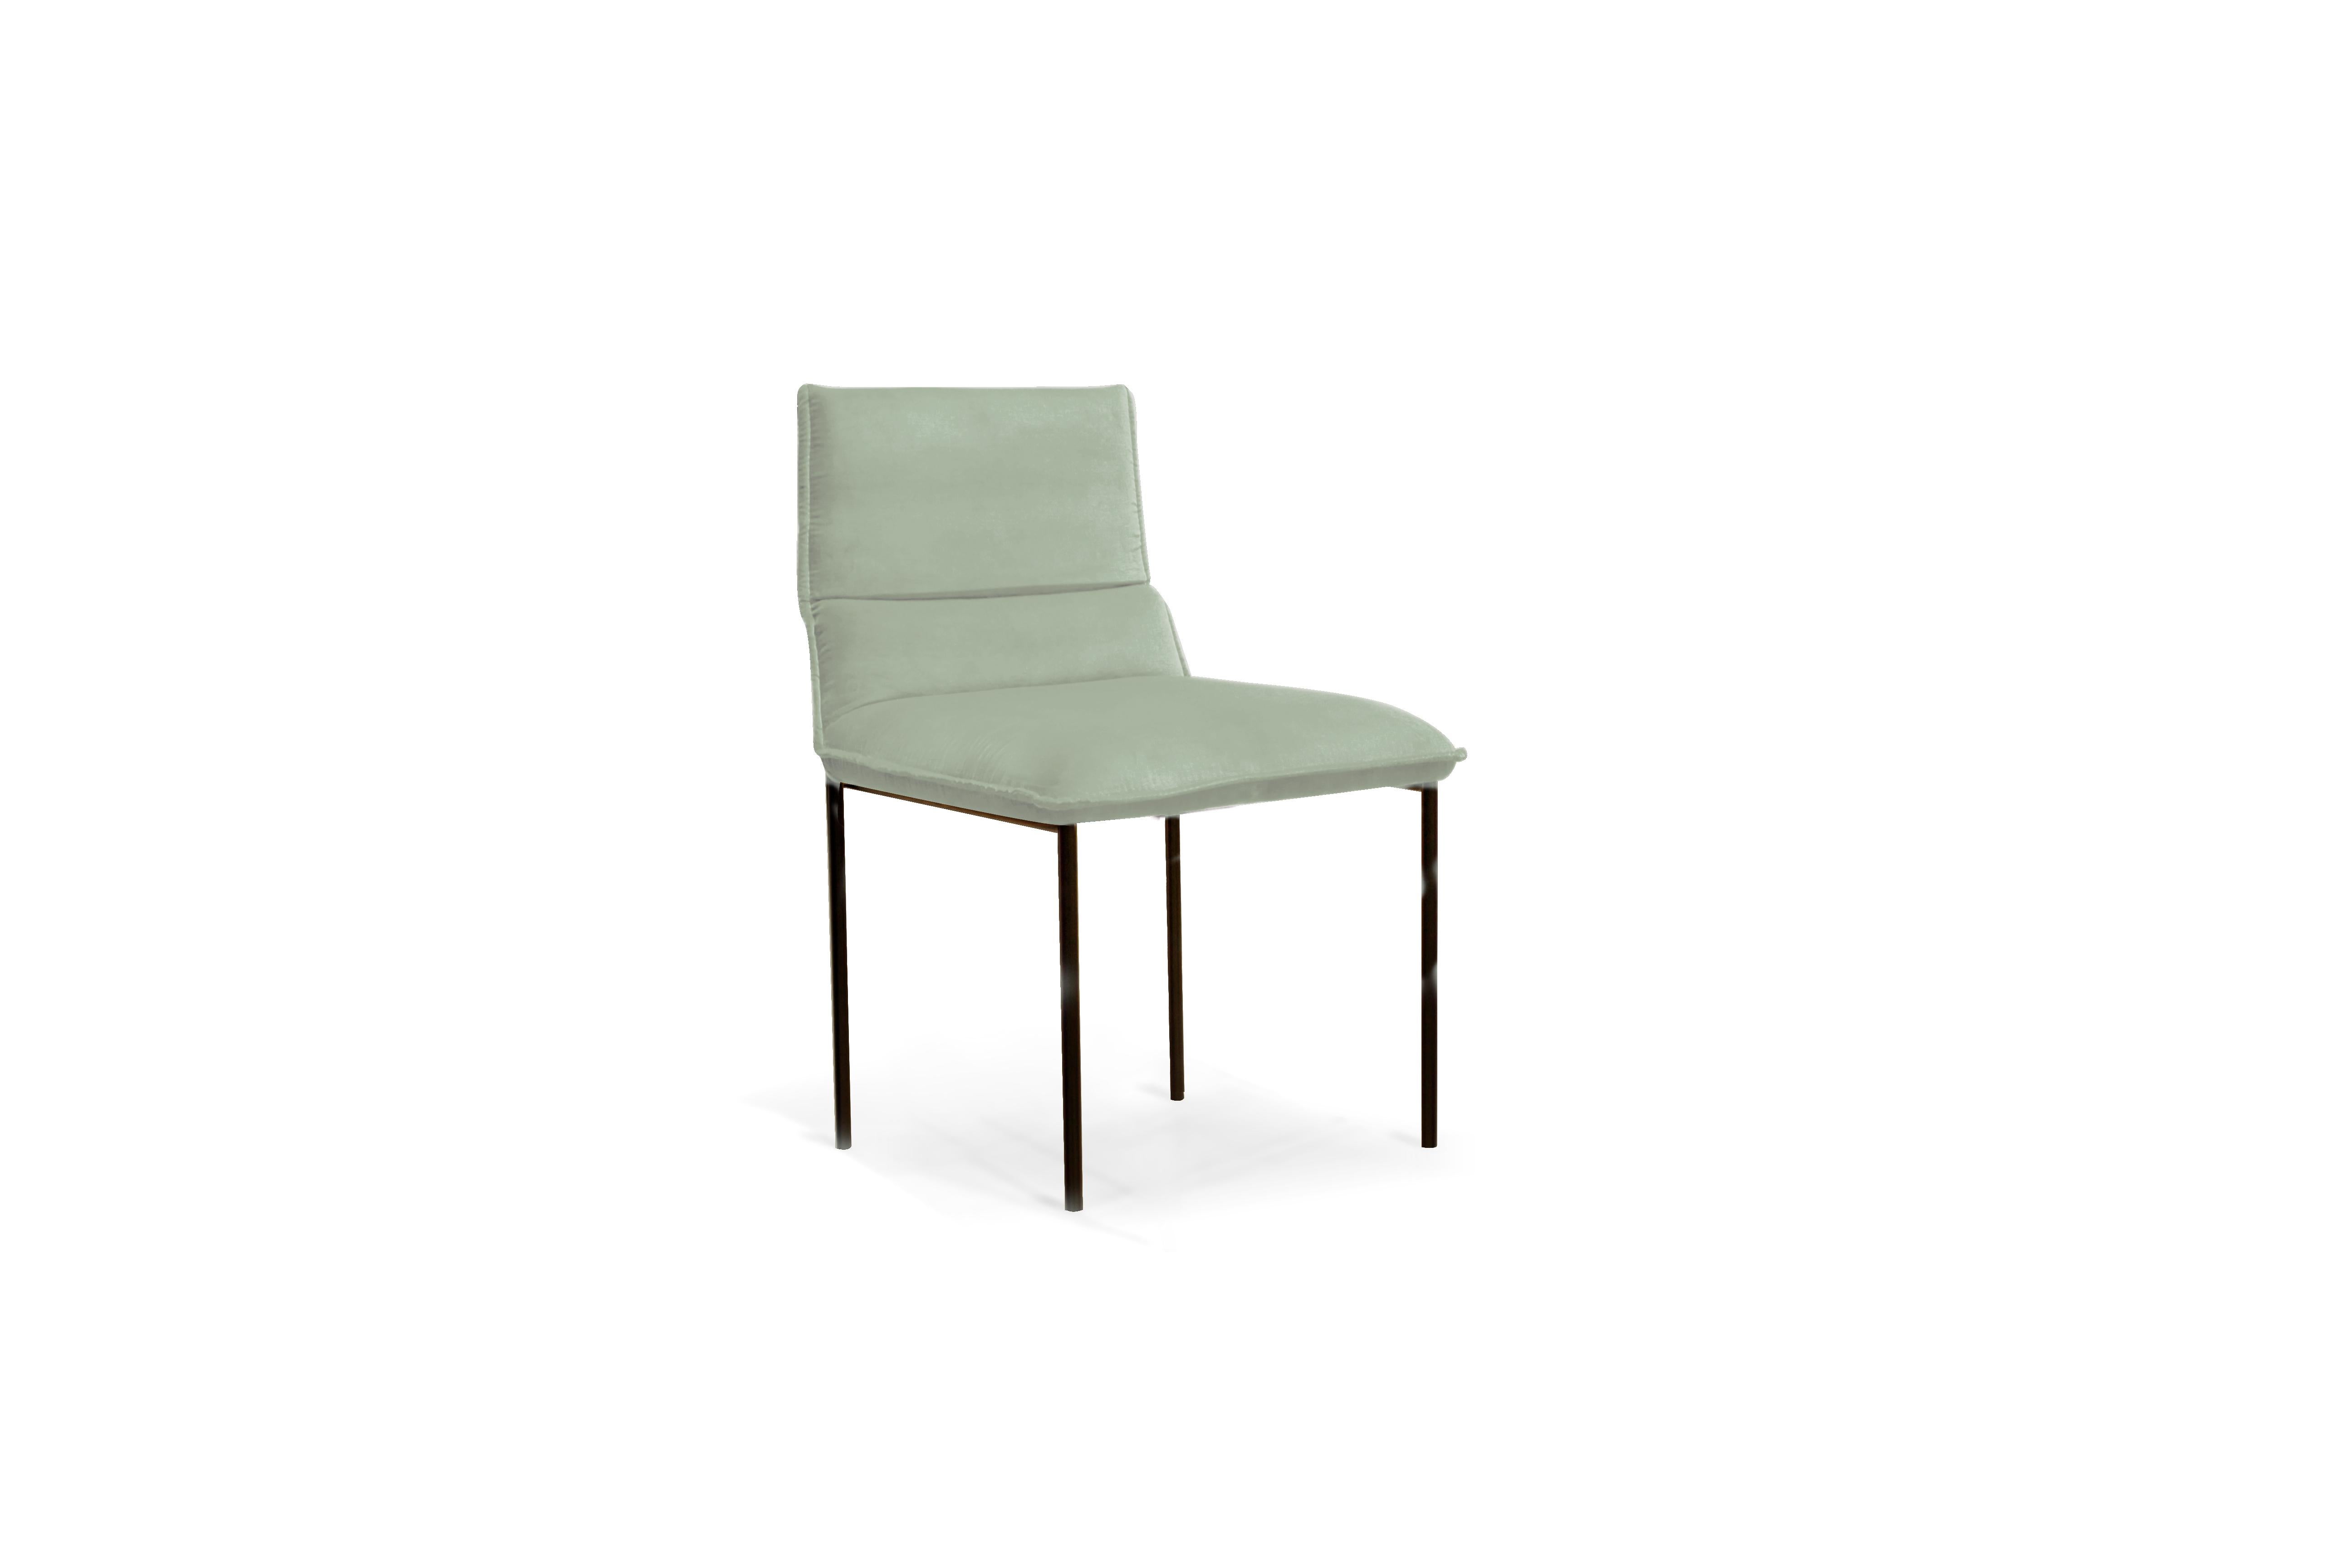 Unique Jeeves chair by Collector
Dimensions: W 45 x D 52 x H 80 cm
Materials: metal, fabric.
Other materials available. 

The Collector brand aims to be part of the daily life by fusing furniture to our home routine and lifestyle, that’s why